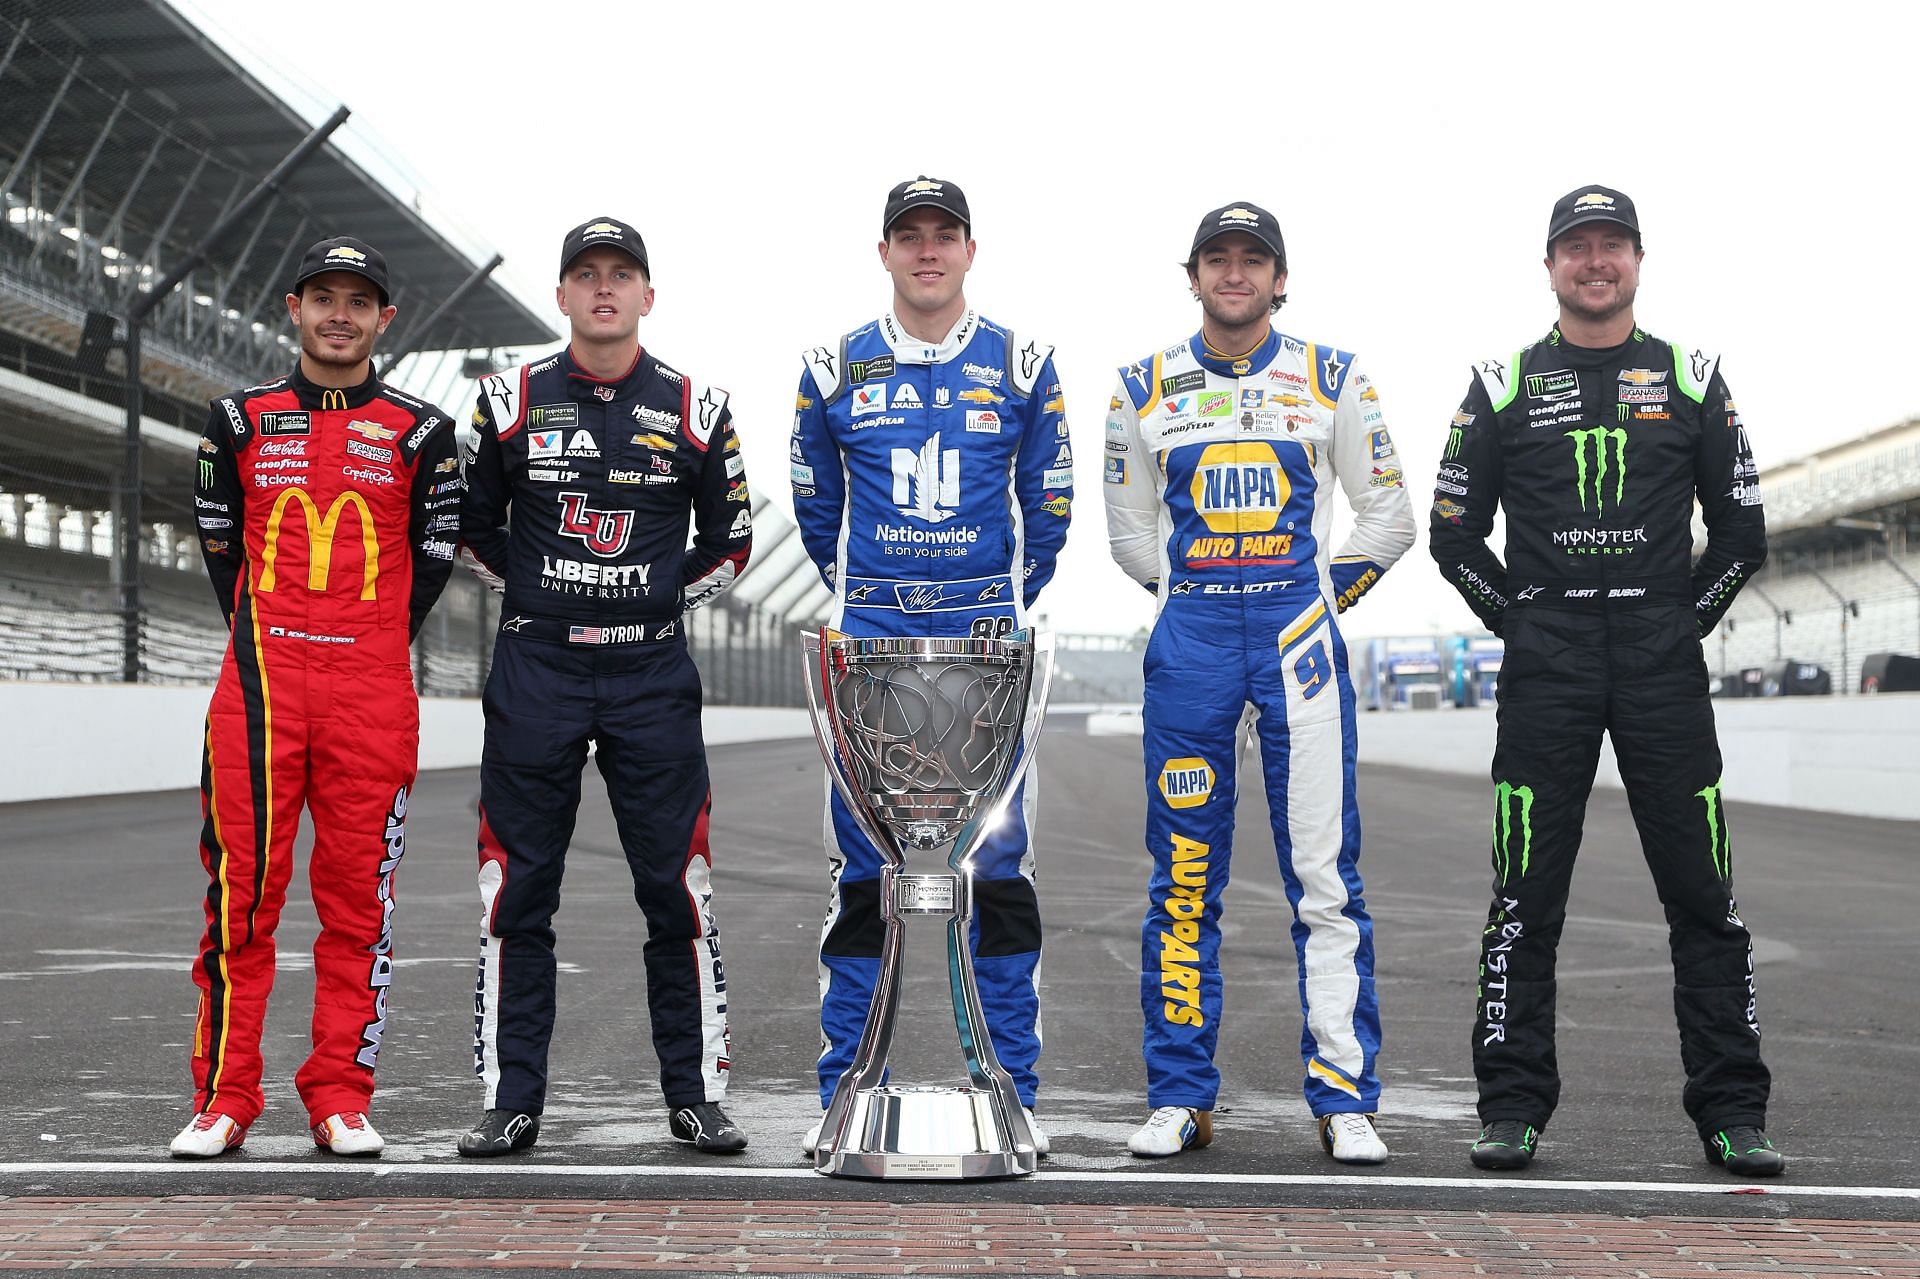 (L-R) Kyle Larson, William Byron, Alex Bowman, Chase Elliott, and Kurt Busch pose for a photo with the 2019 Monster Energy NASCAR Cup Series trophy following the Monster Energy NASCAR Cup Series Big Machine Vodka 400 at the Indianapolis Motor Speedway (Photo by Brian Lawdermilk/Getty Images)